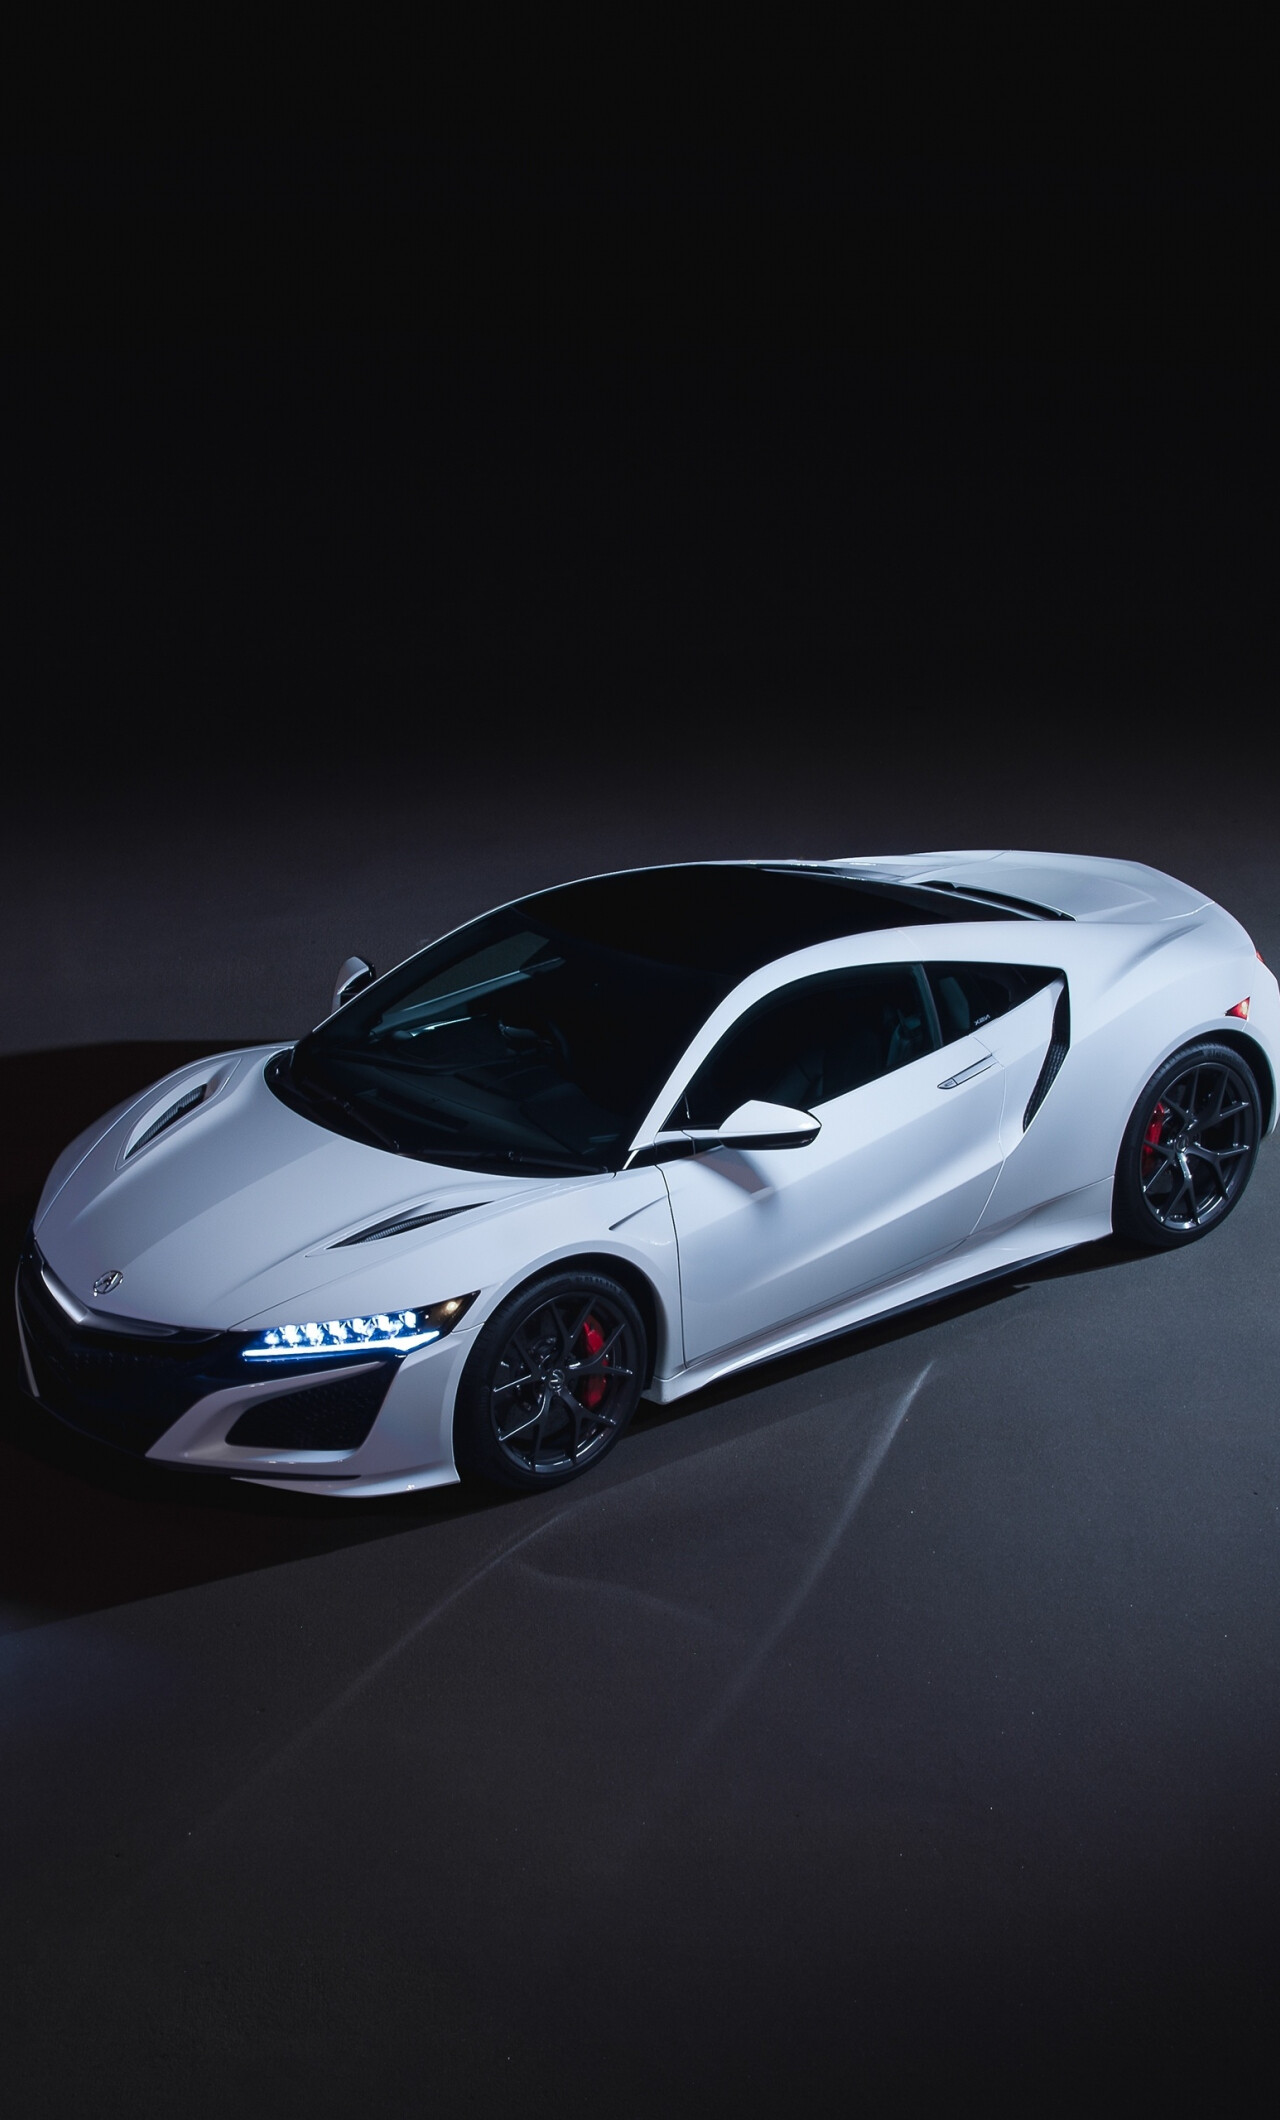 Acura: An upscale automaker known for offering cars with impressive levels of luxury, features and performance, Sports car. 1280x2120 HD Wallpaper.